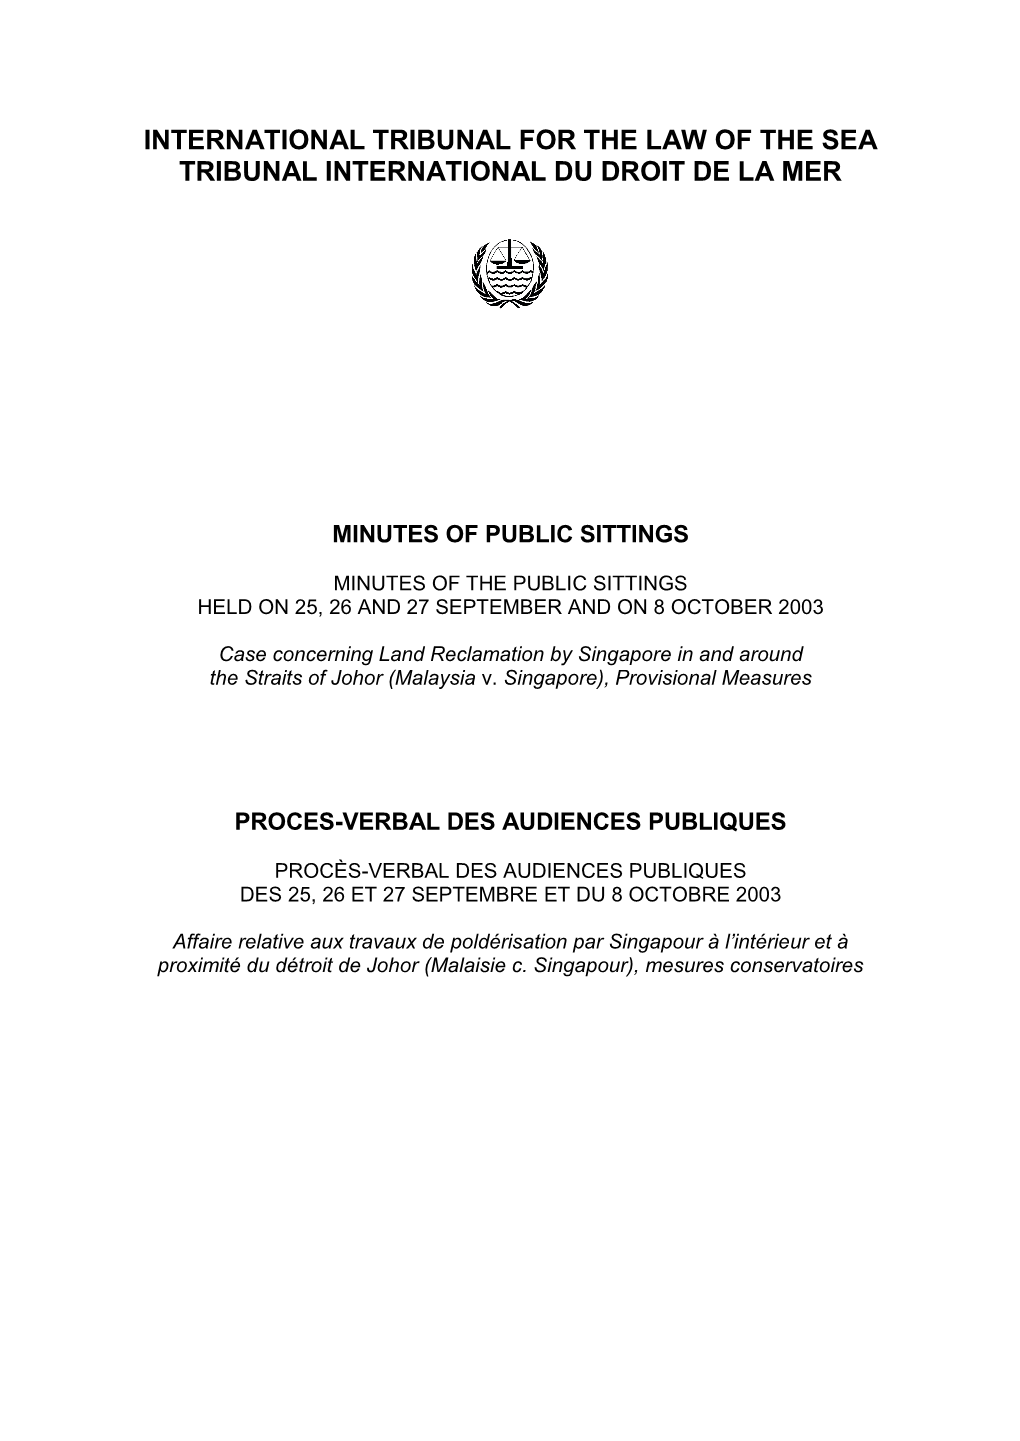 Minutes of Public Hearings